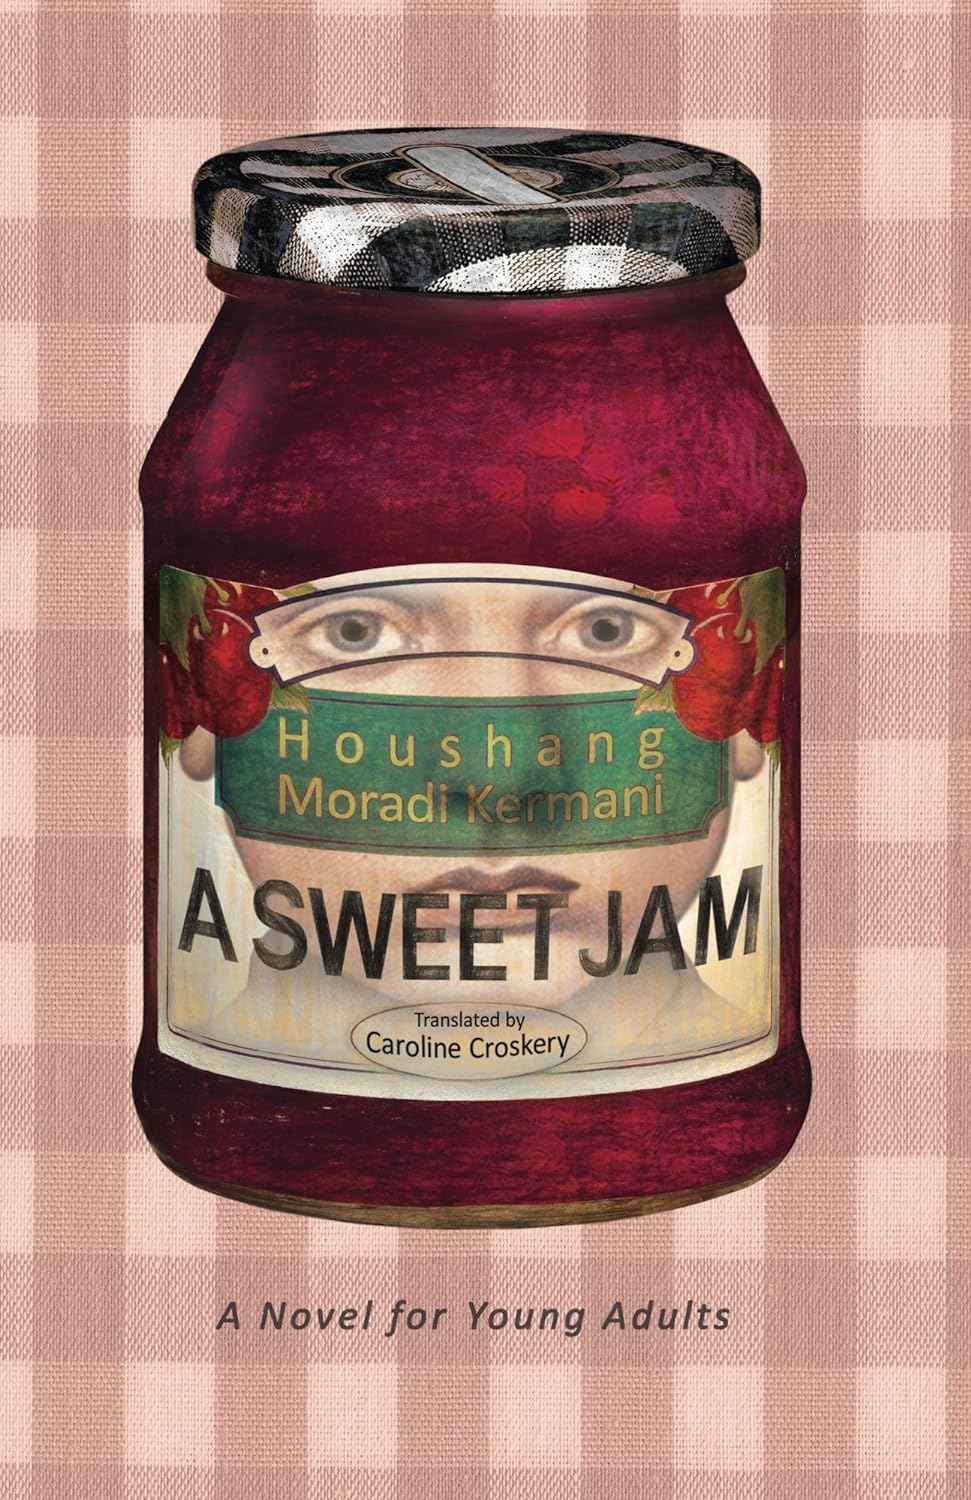 Cover for A Sweet Jam featuring an illustration of a jar of jam with a person's face in the background of the label on thee jar on a background that is pink and patterned like a picnic tablecloth.